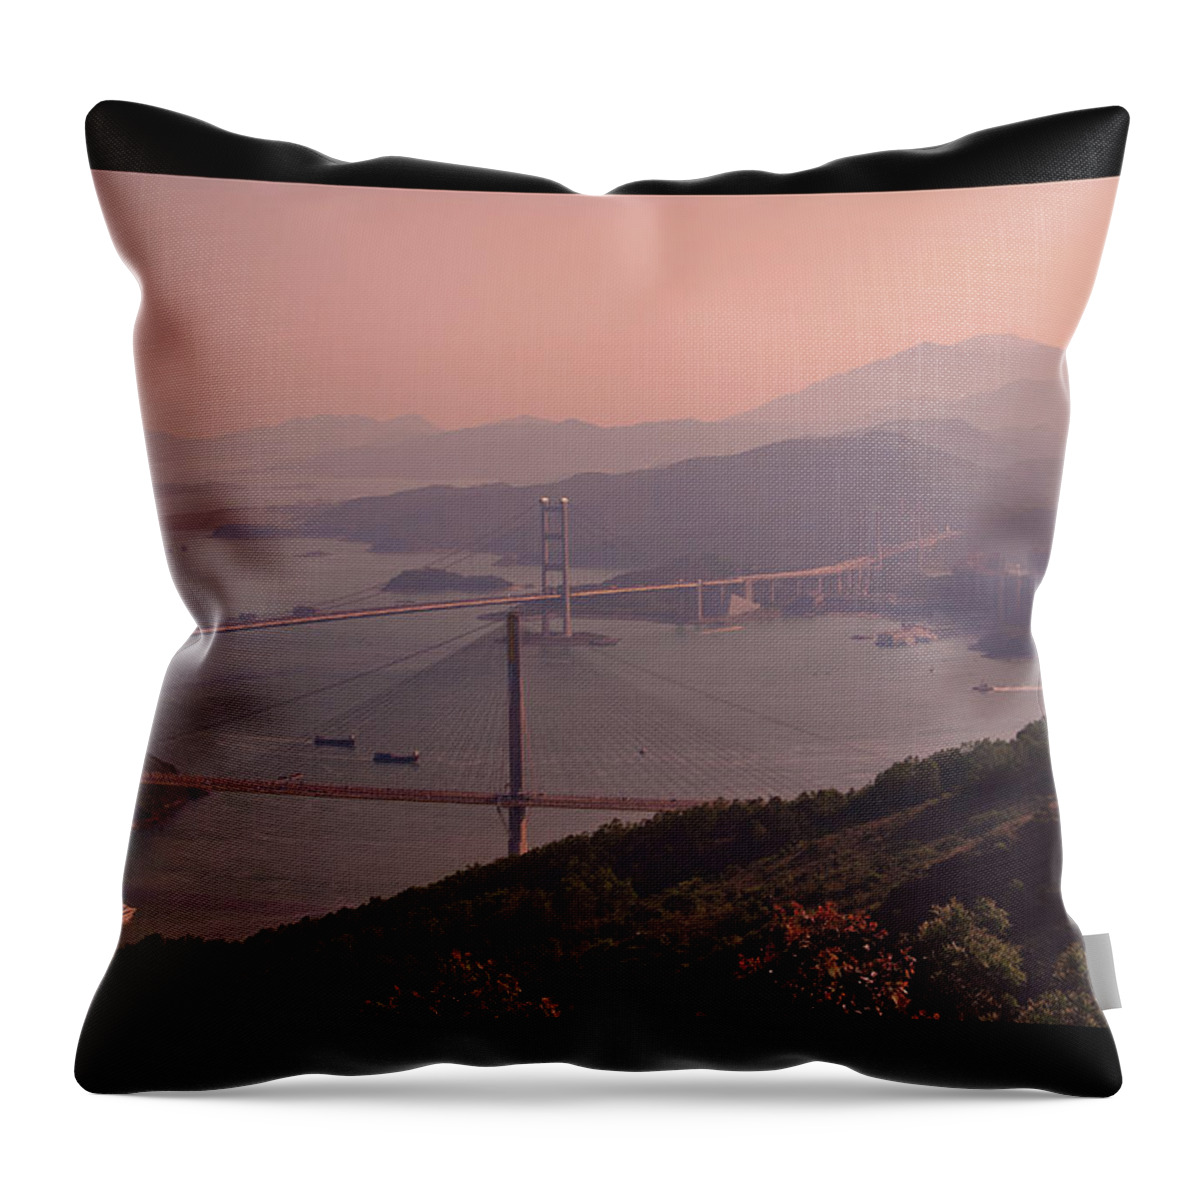 Tranquility Throw Pillow featuring the photograph Tsing Ma Bridge And Ting Kau Bridge In by D3sign